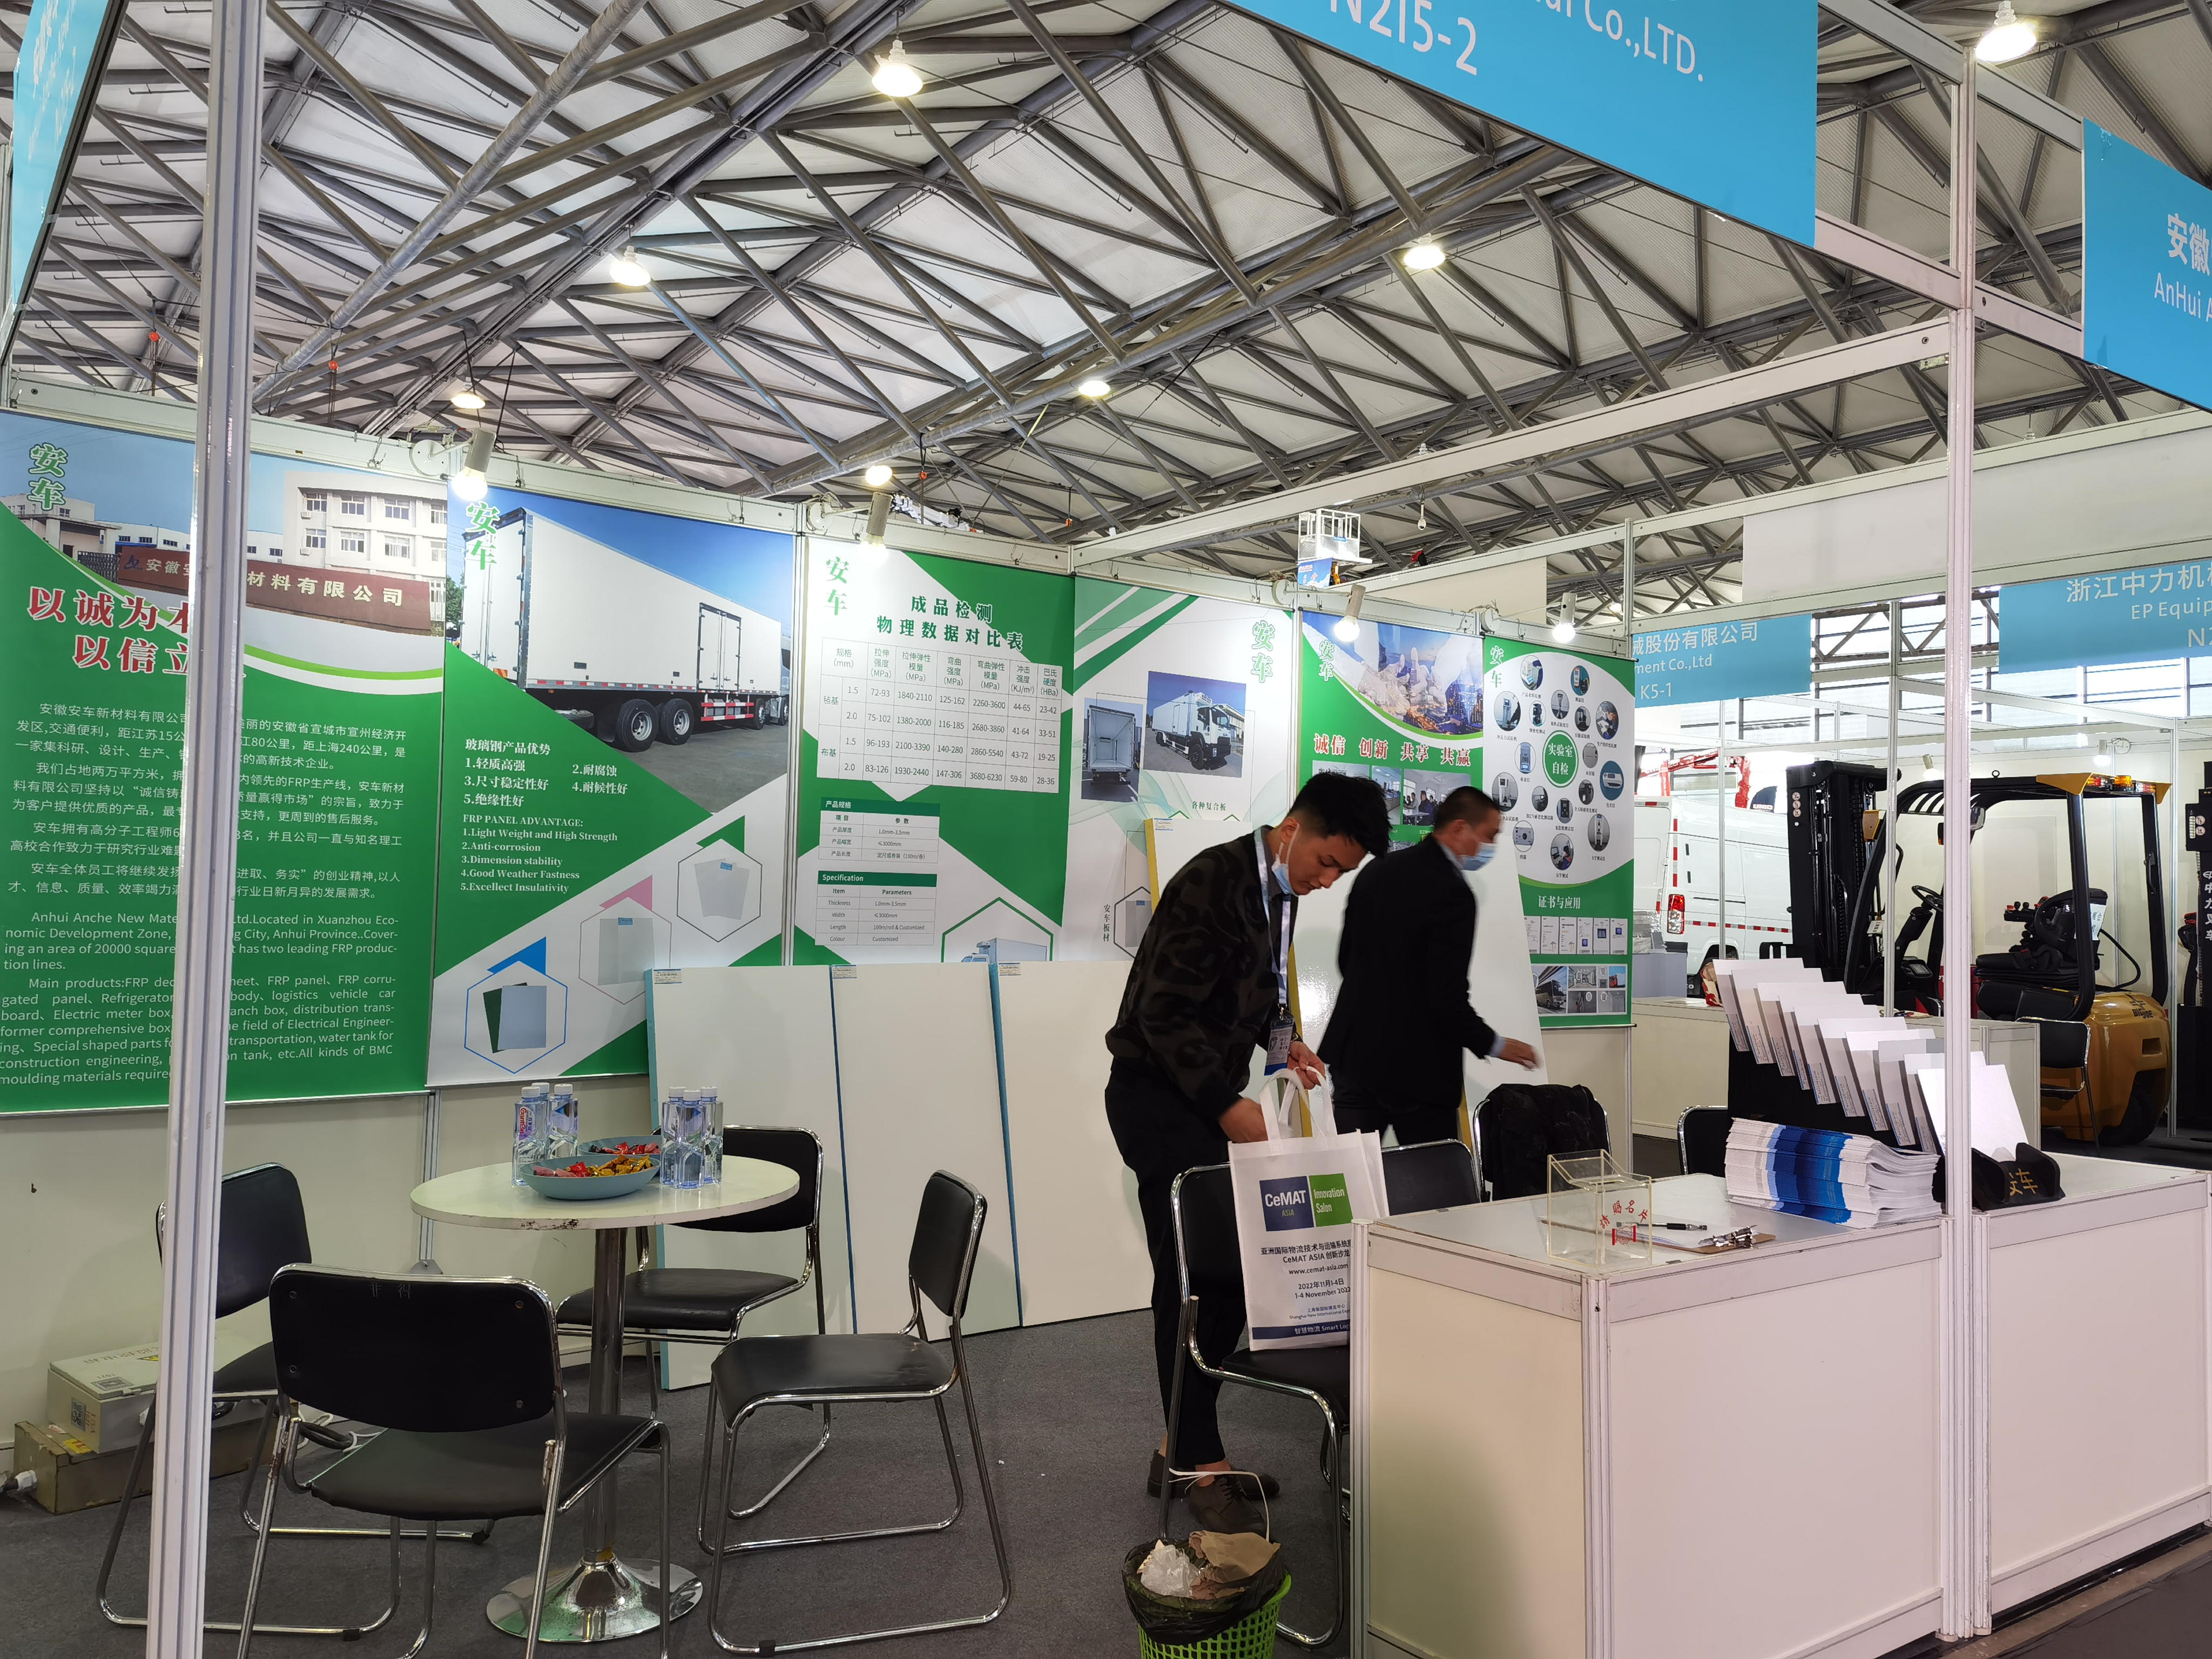  October 2021 Shanghai Cold chain Logistics exhibition ---- New material - high quality FRP material supplier